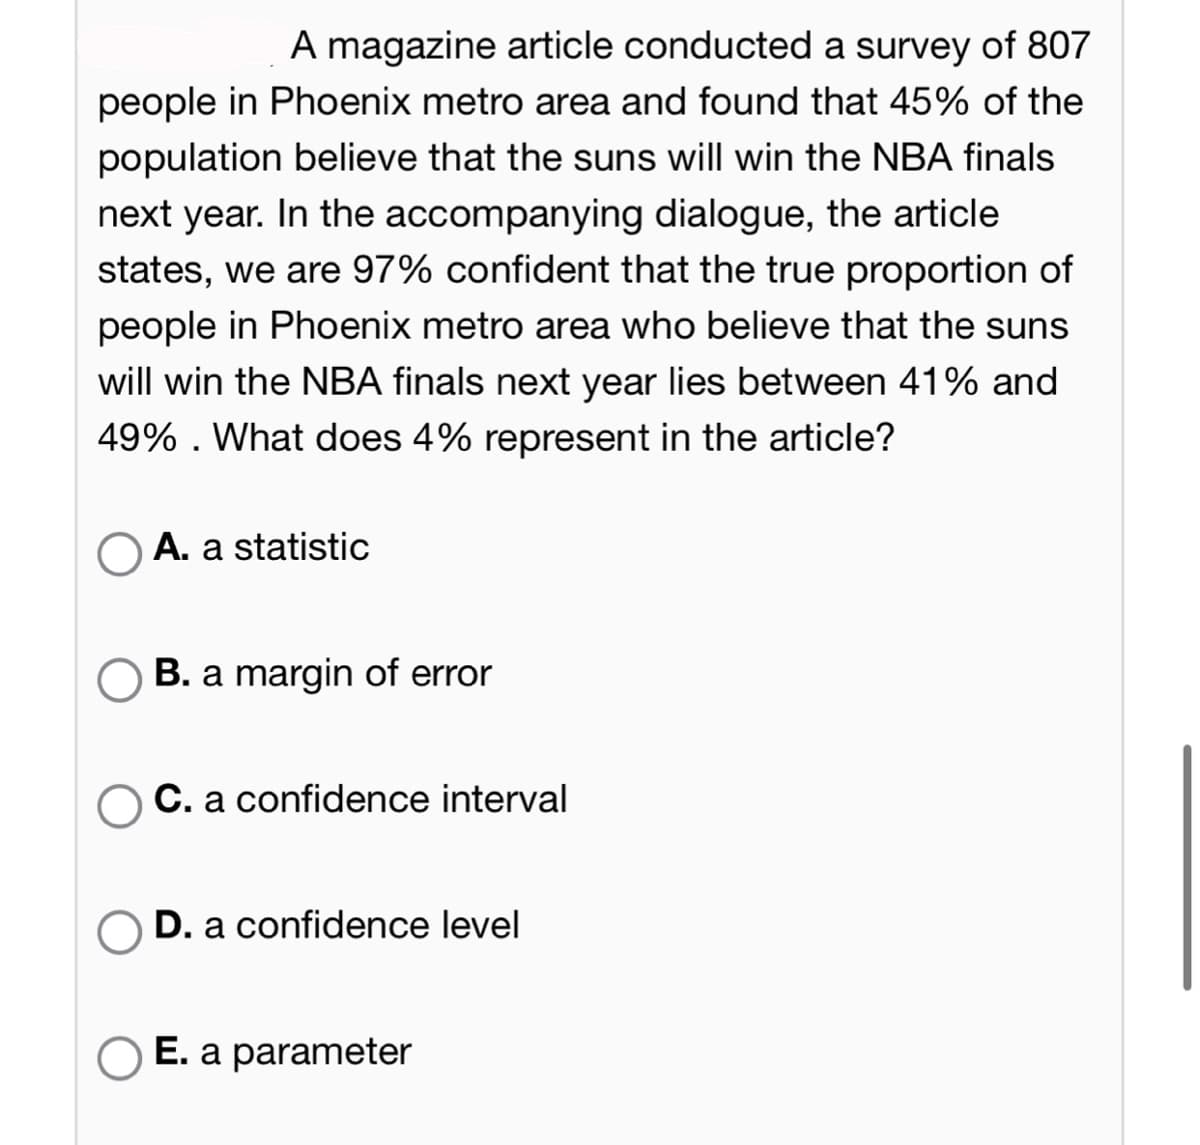 A magazine article conducted a survey of 807
people in Phoenix metro area and found that 45% of the
population believe that the suns will win the NBA finals
next year. In the accompanying dialogue, the article
states, we are 97% confident that the true proportion of
people in Phoenix metro area who believe that the suns
will win the NBA finals next year lies between 41% and
49%. What does 4% represent in the article?
OA. a statistic
B. a margin of error
O C. a confidence interval
D. a confidence level
E. a parameter